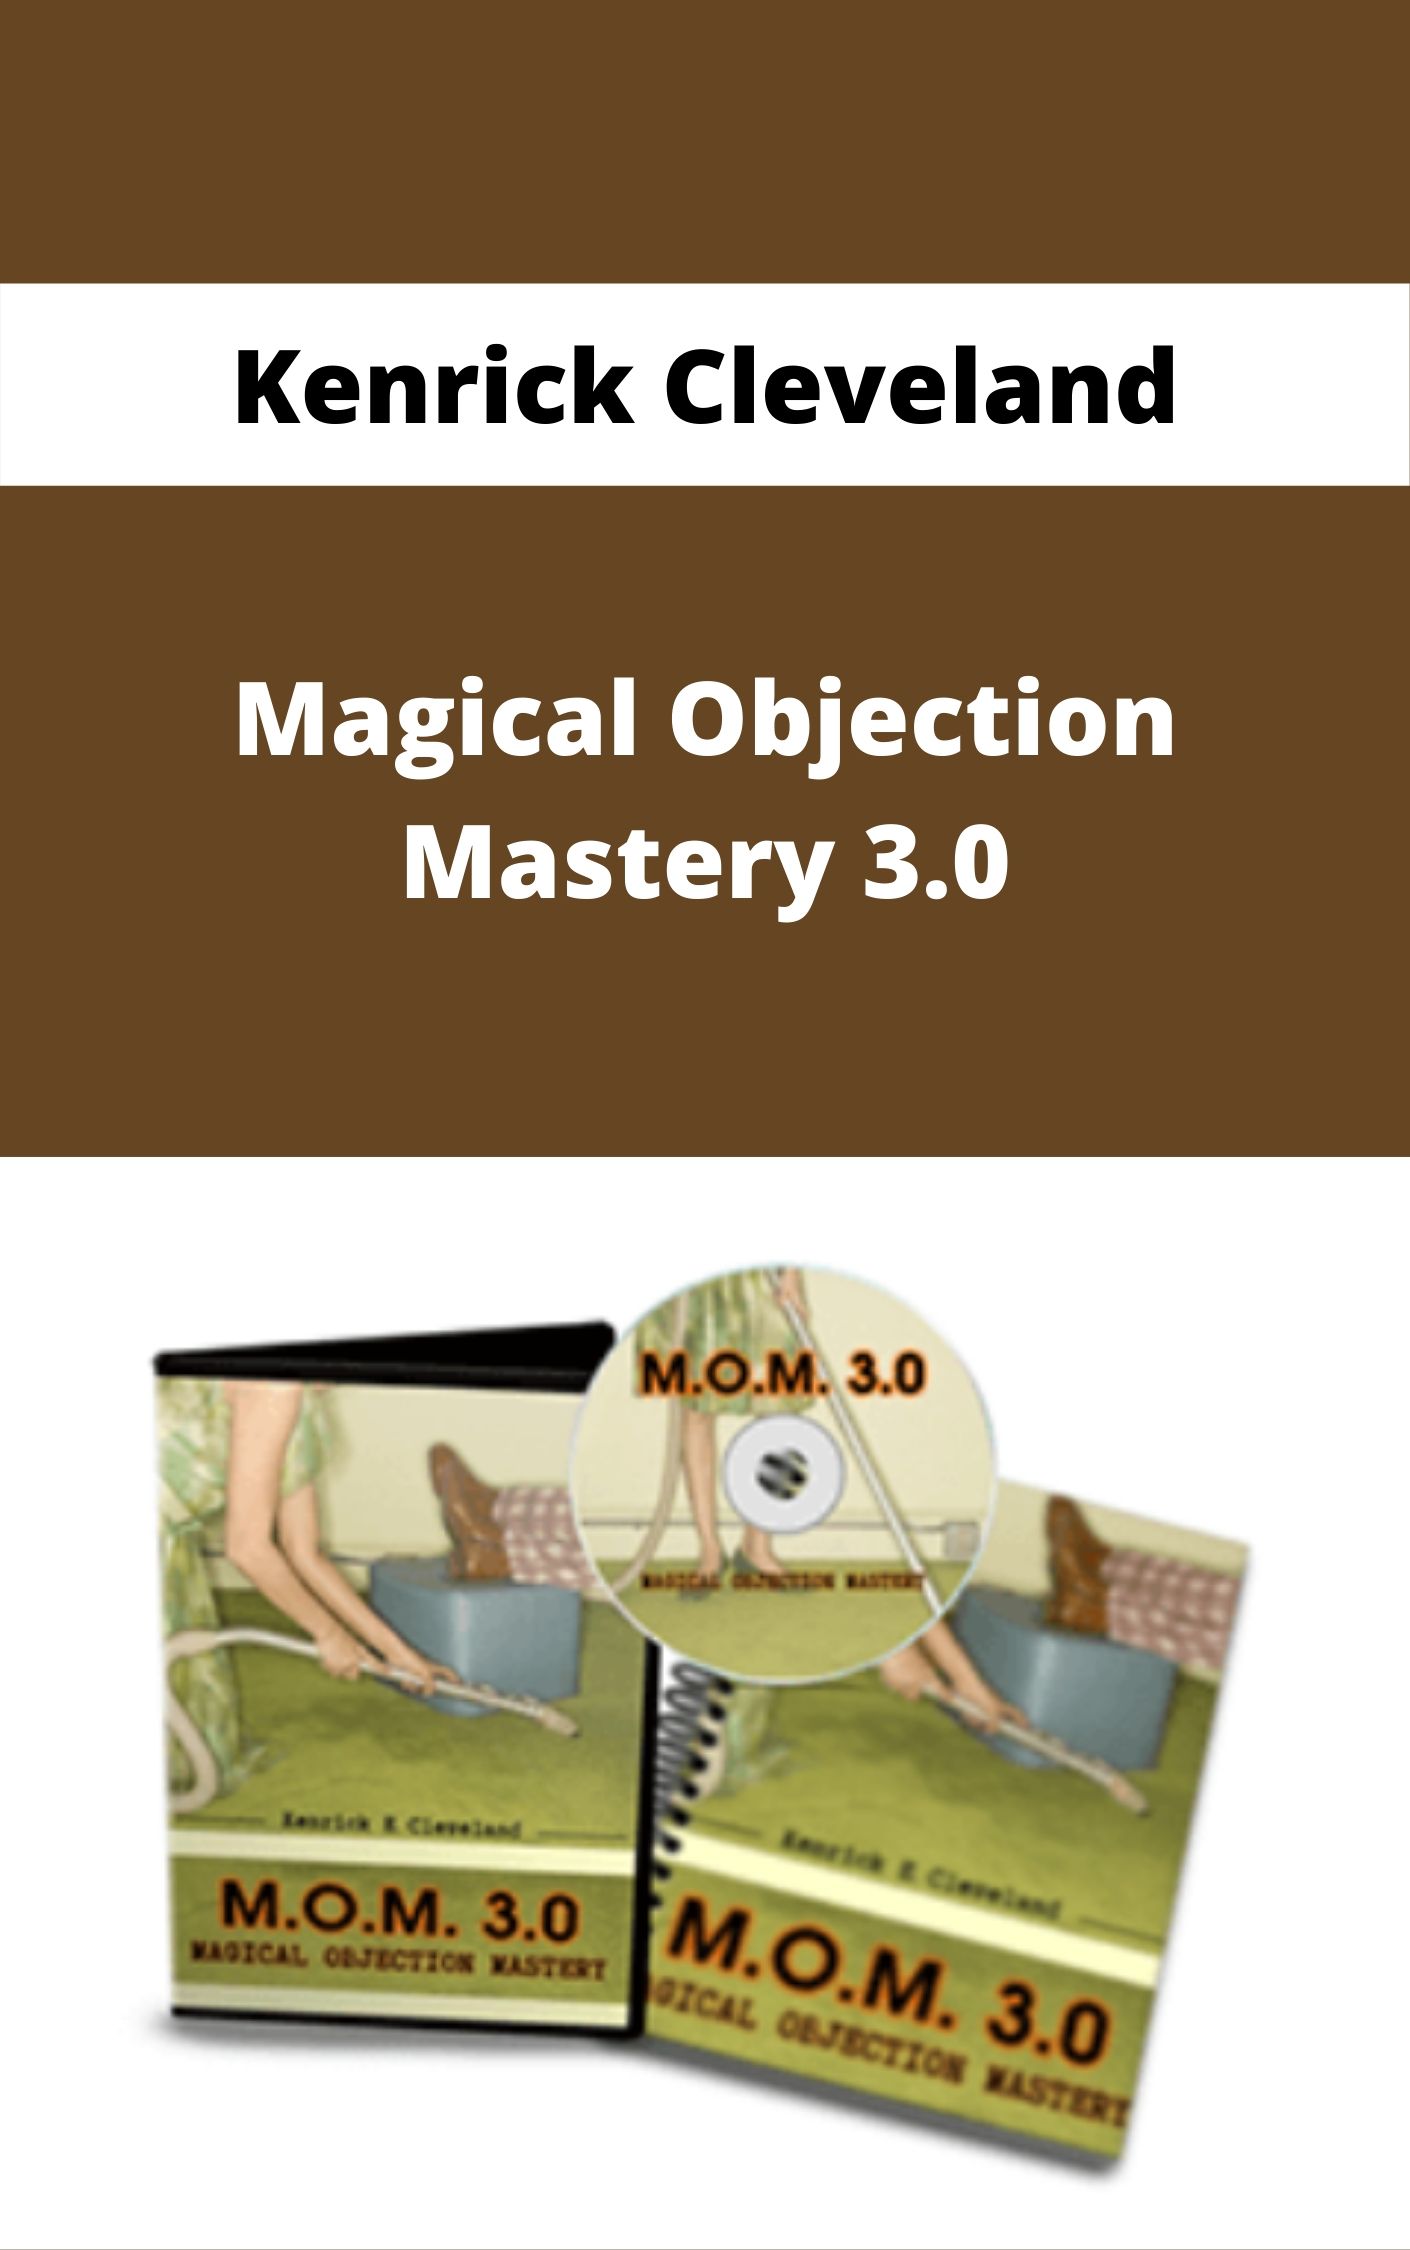 [SUPER HOT SHARE] Kenrick Cleveland – Magical Objection Mastery 3.0 Download